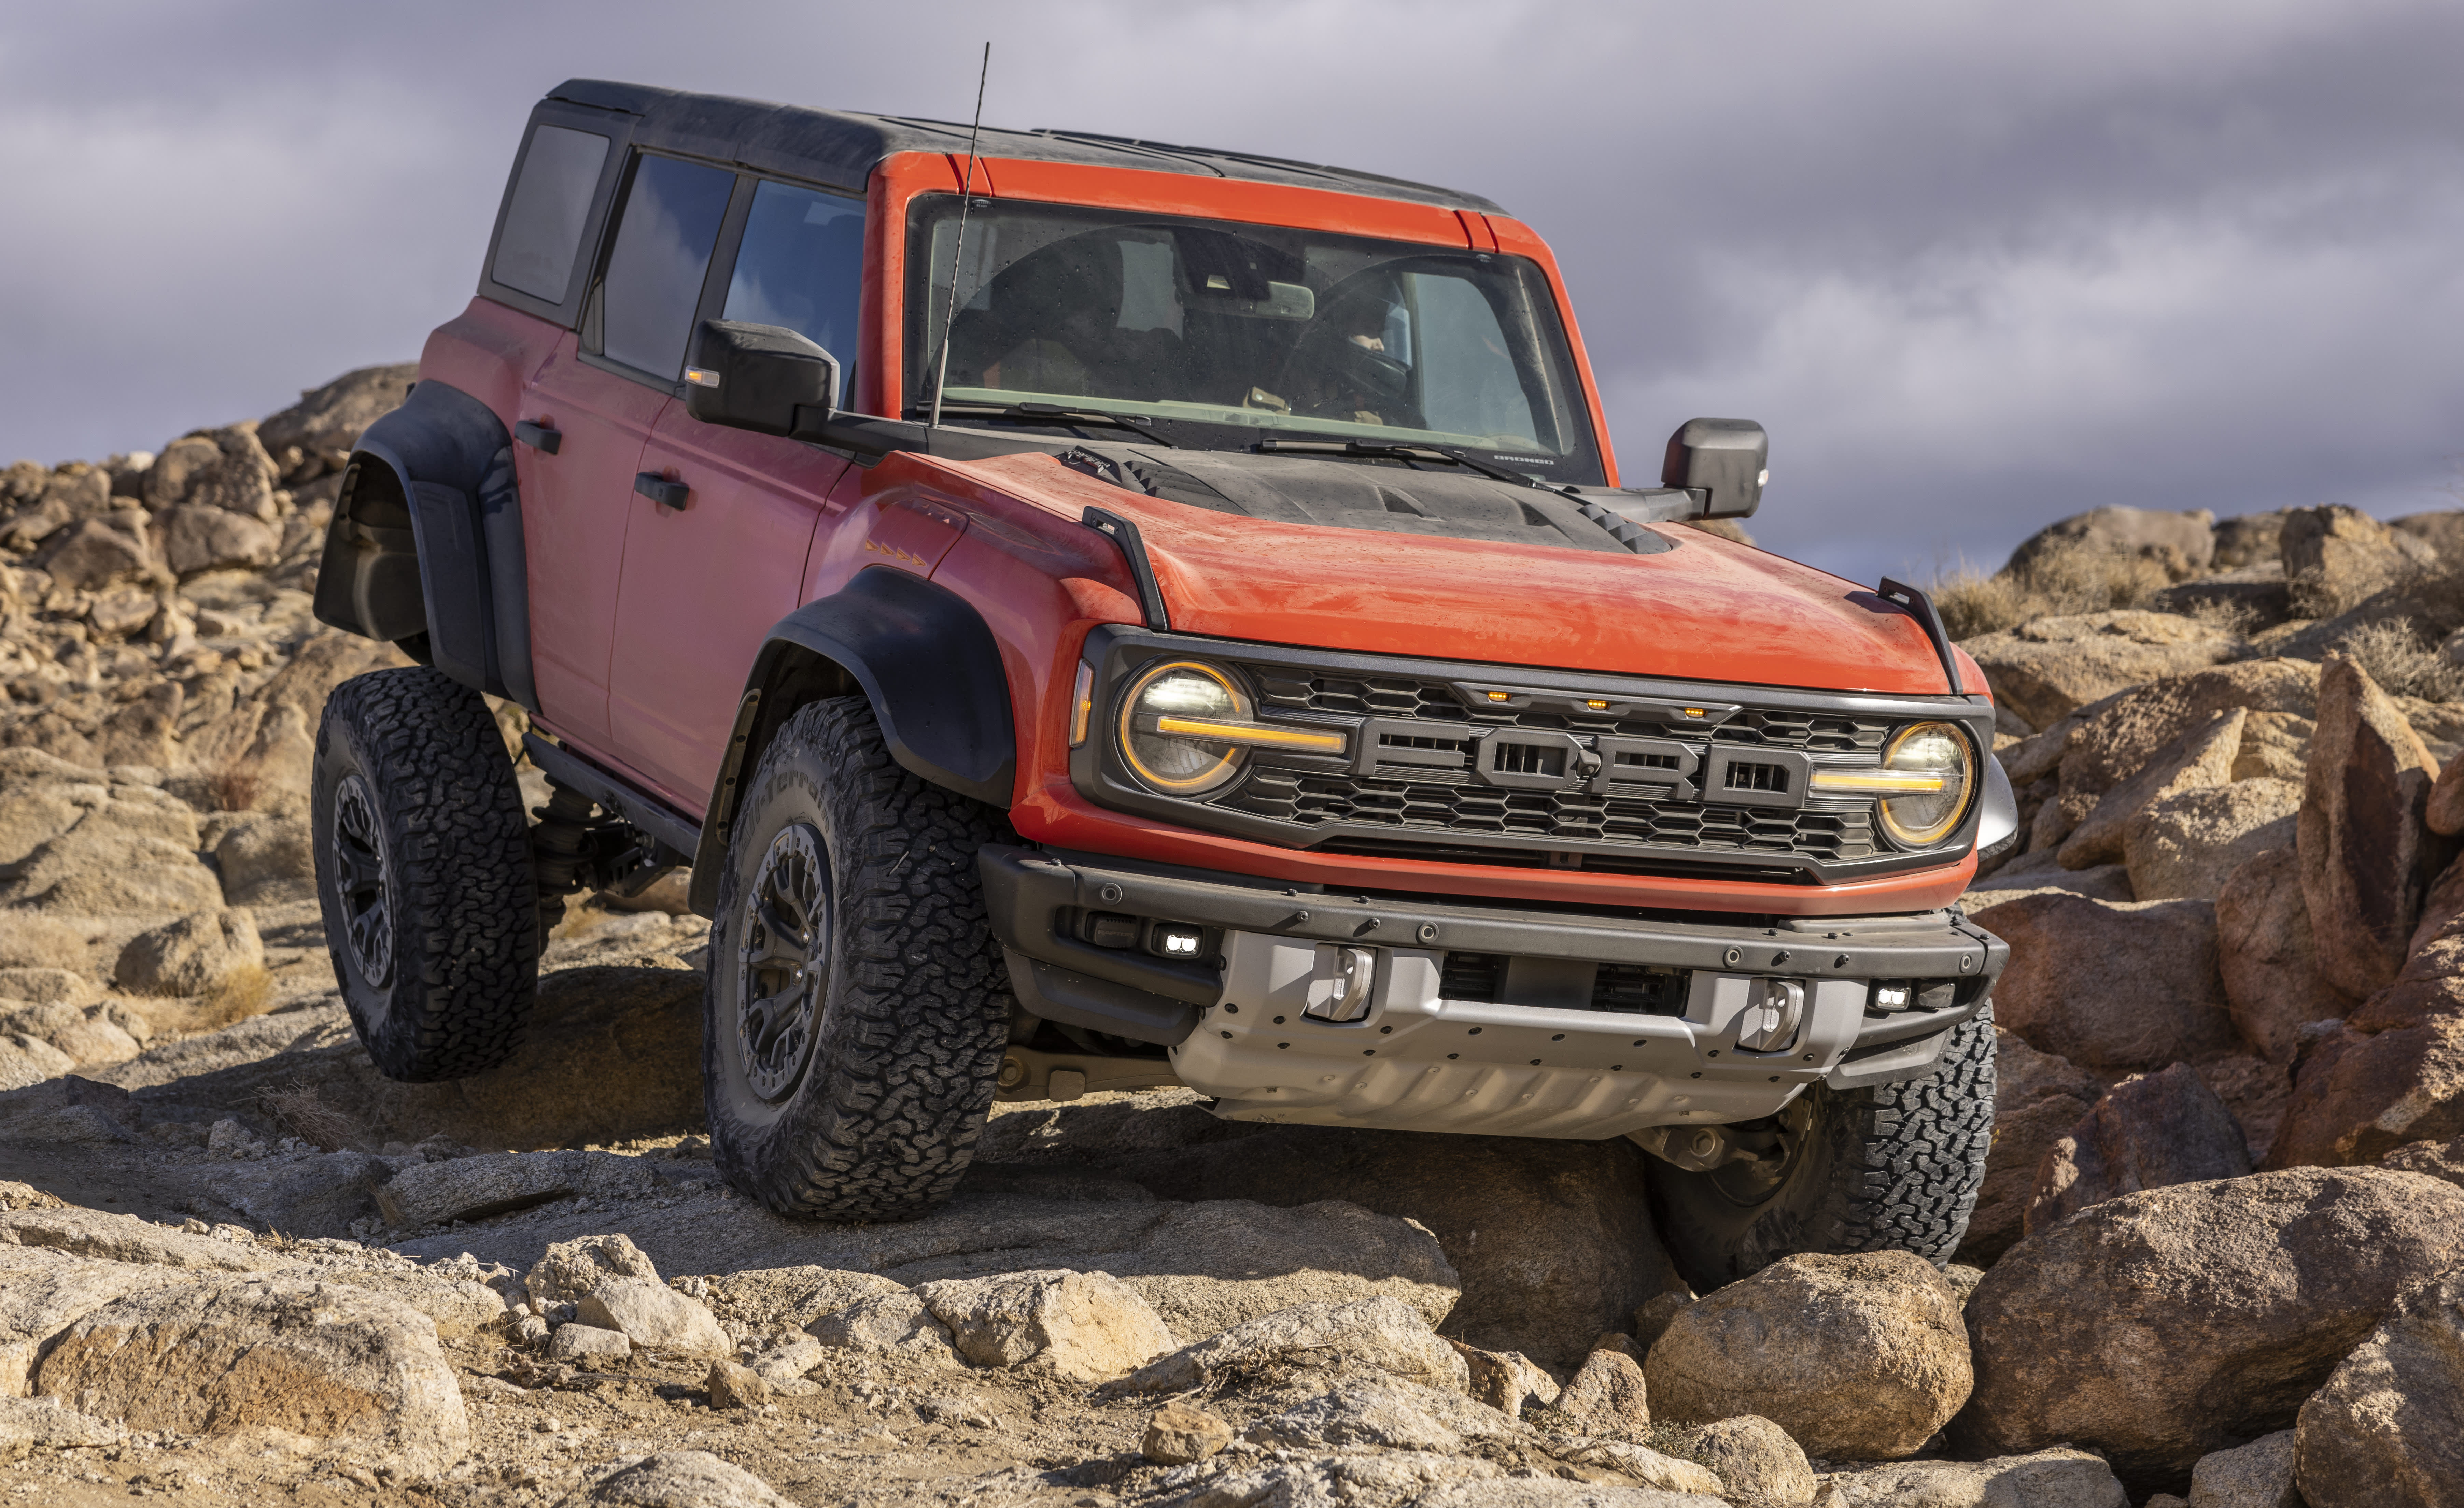 Ford Bronco Raptor SUV is a 'desert-racing beast," CEO says